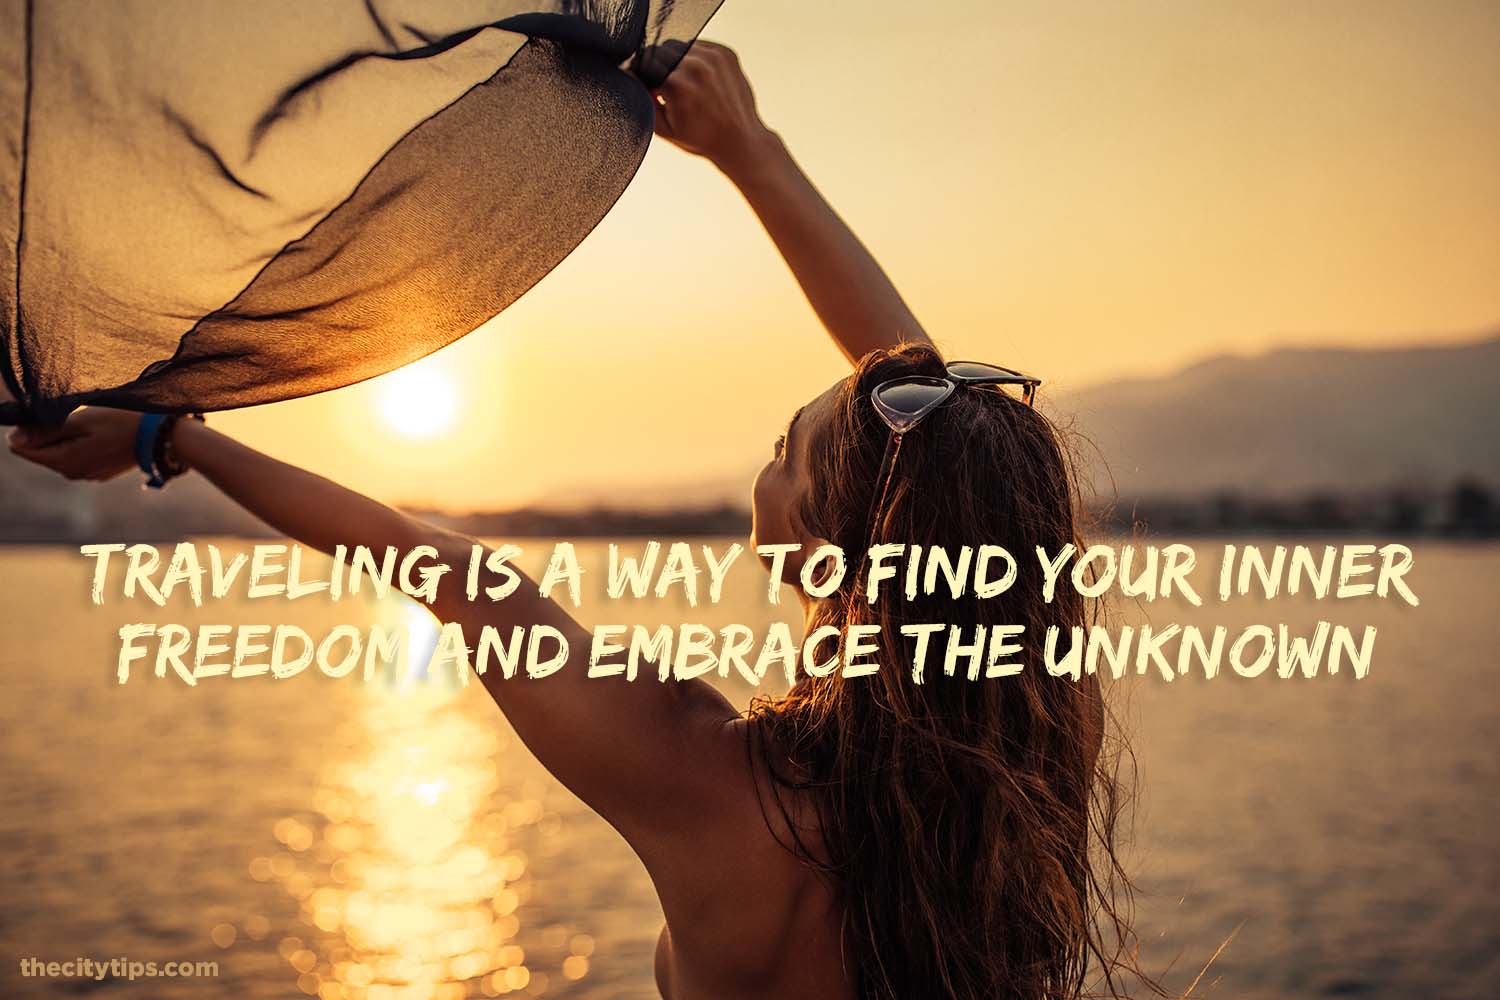 "Traveling is a way to find your inner freedom and embrace the unknown."